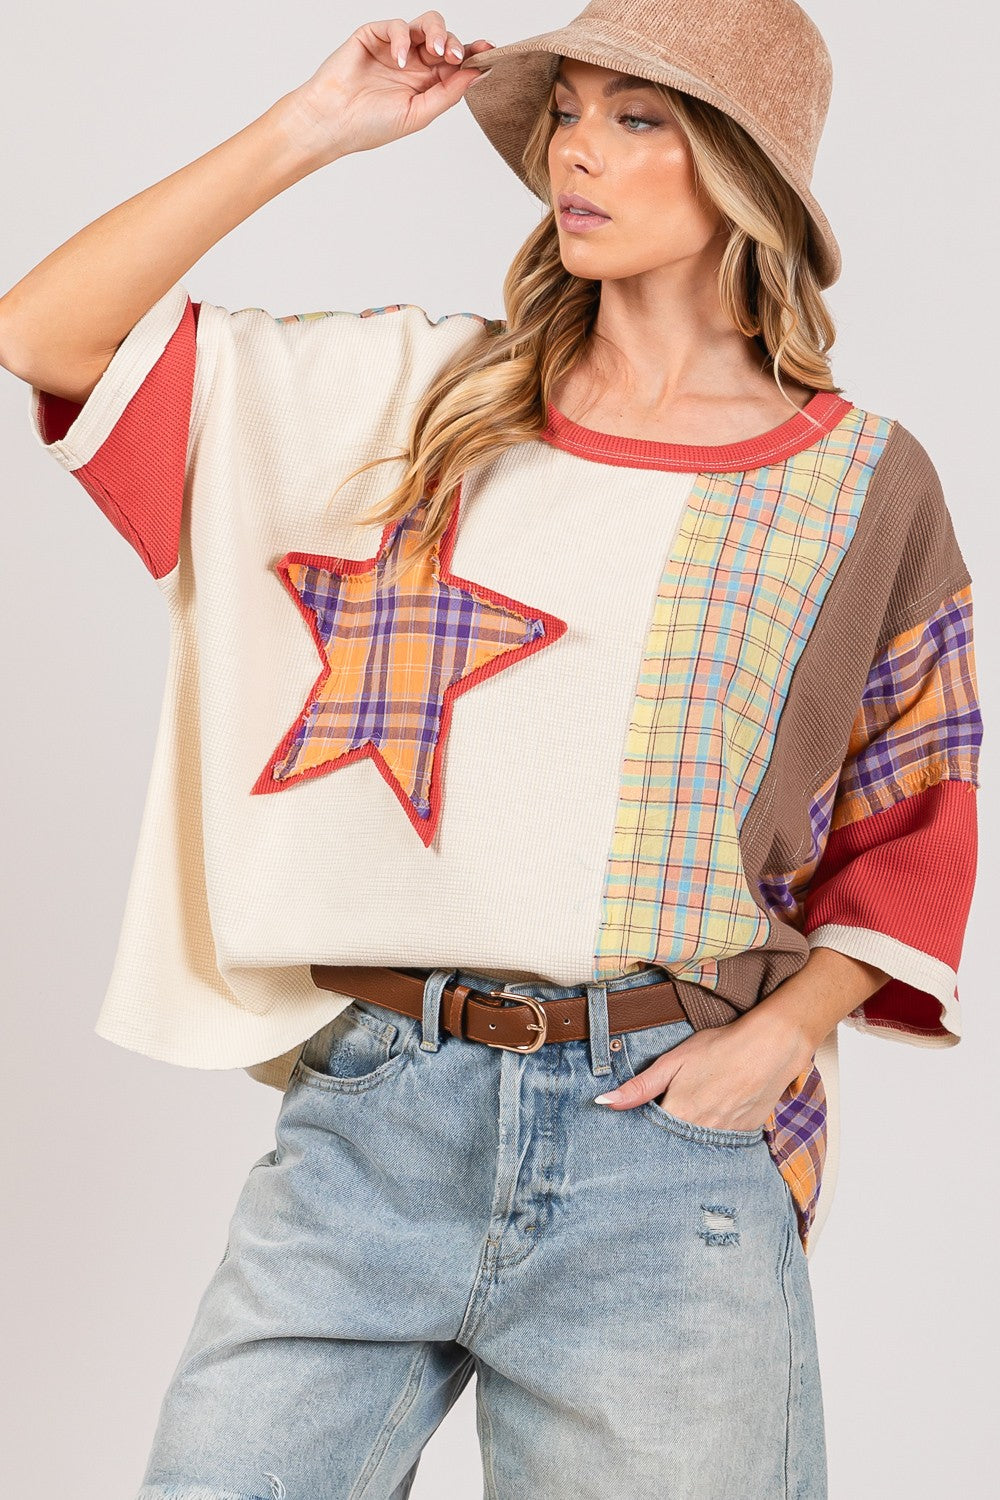 SAGE + FIG Round Neck Plaid Star Patch T-Shirt in Berry Trendsi